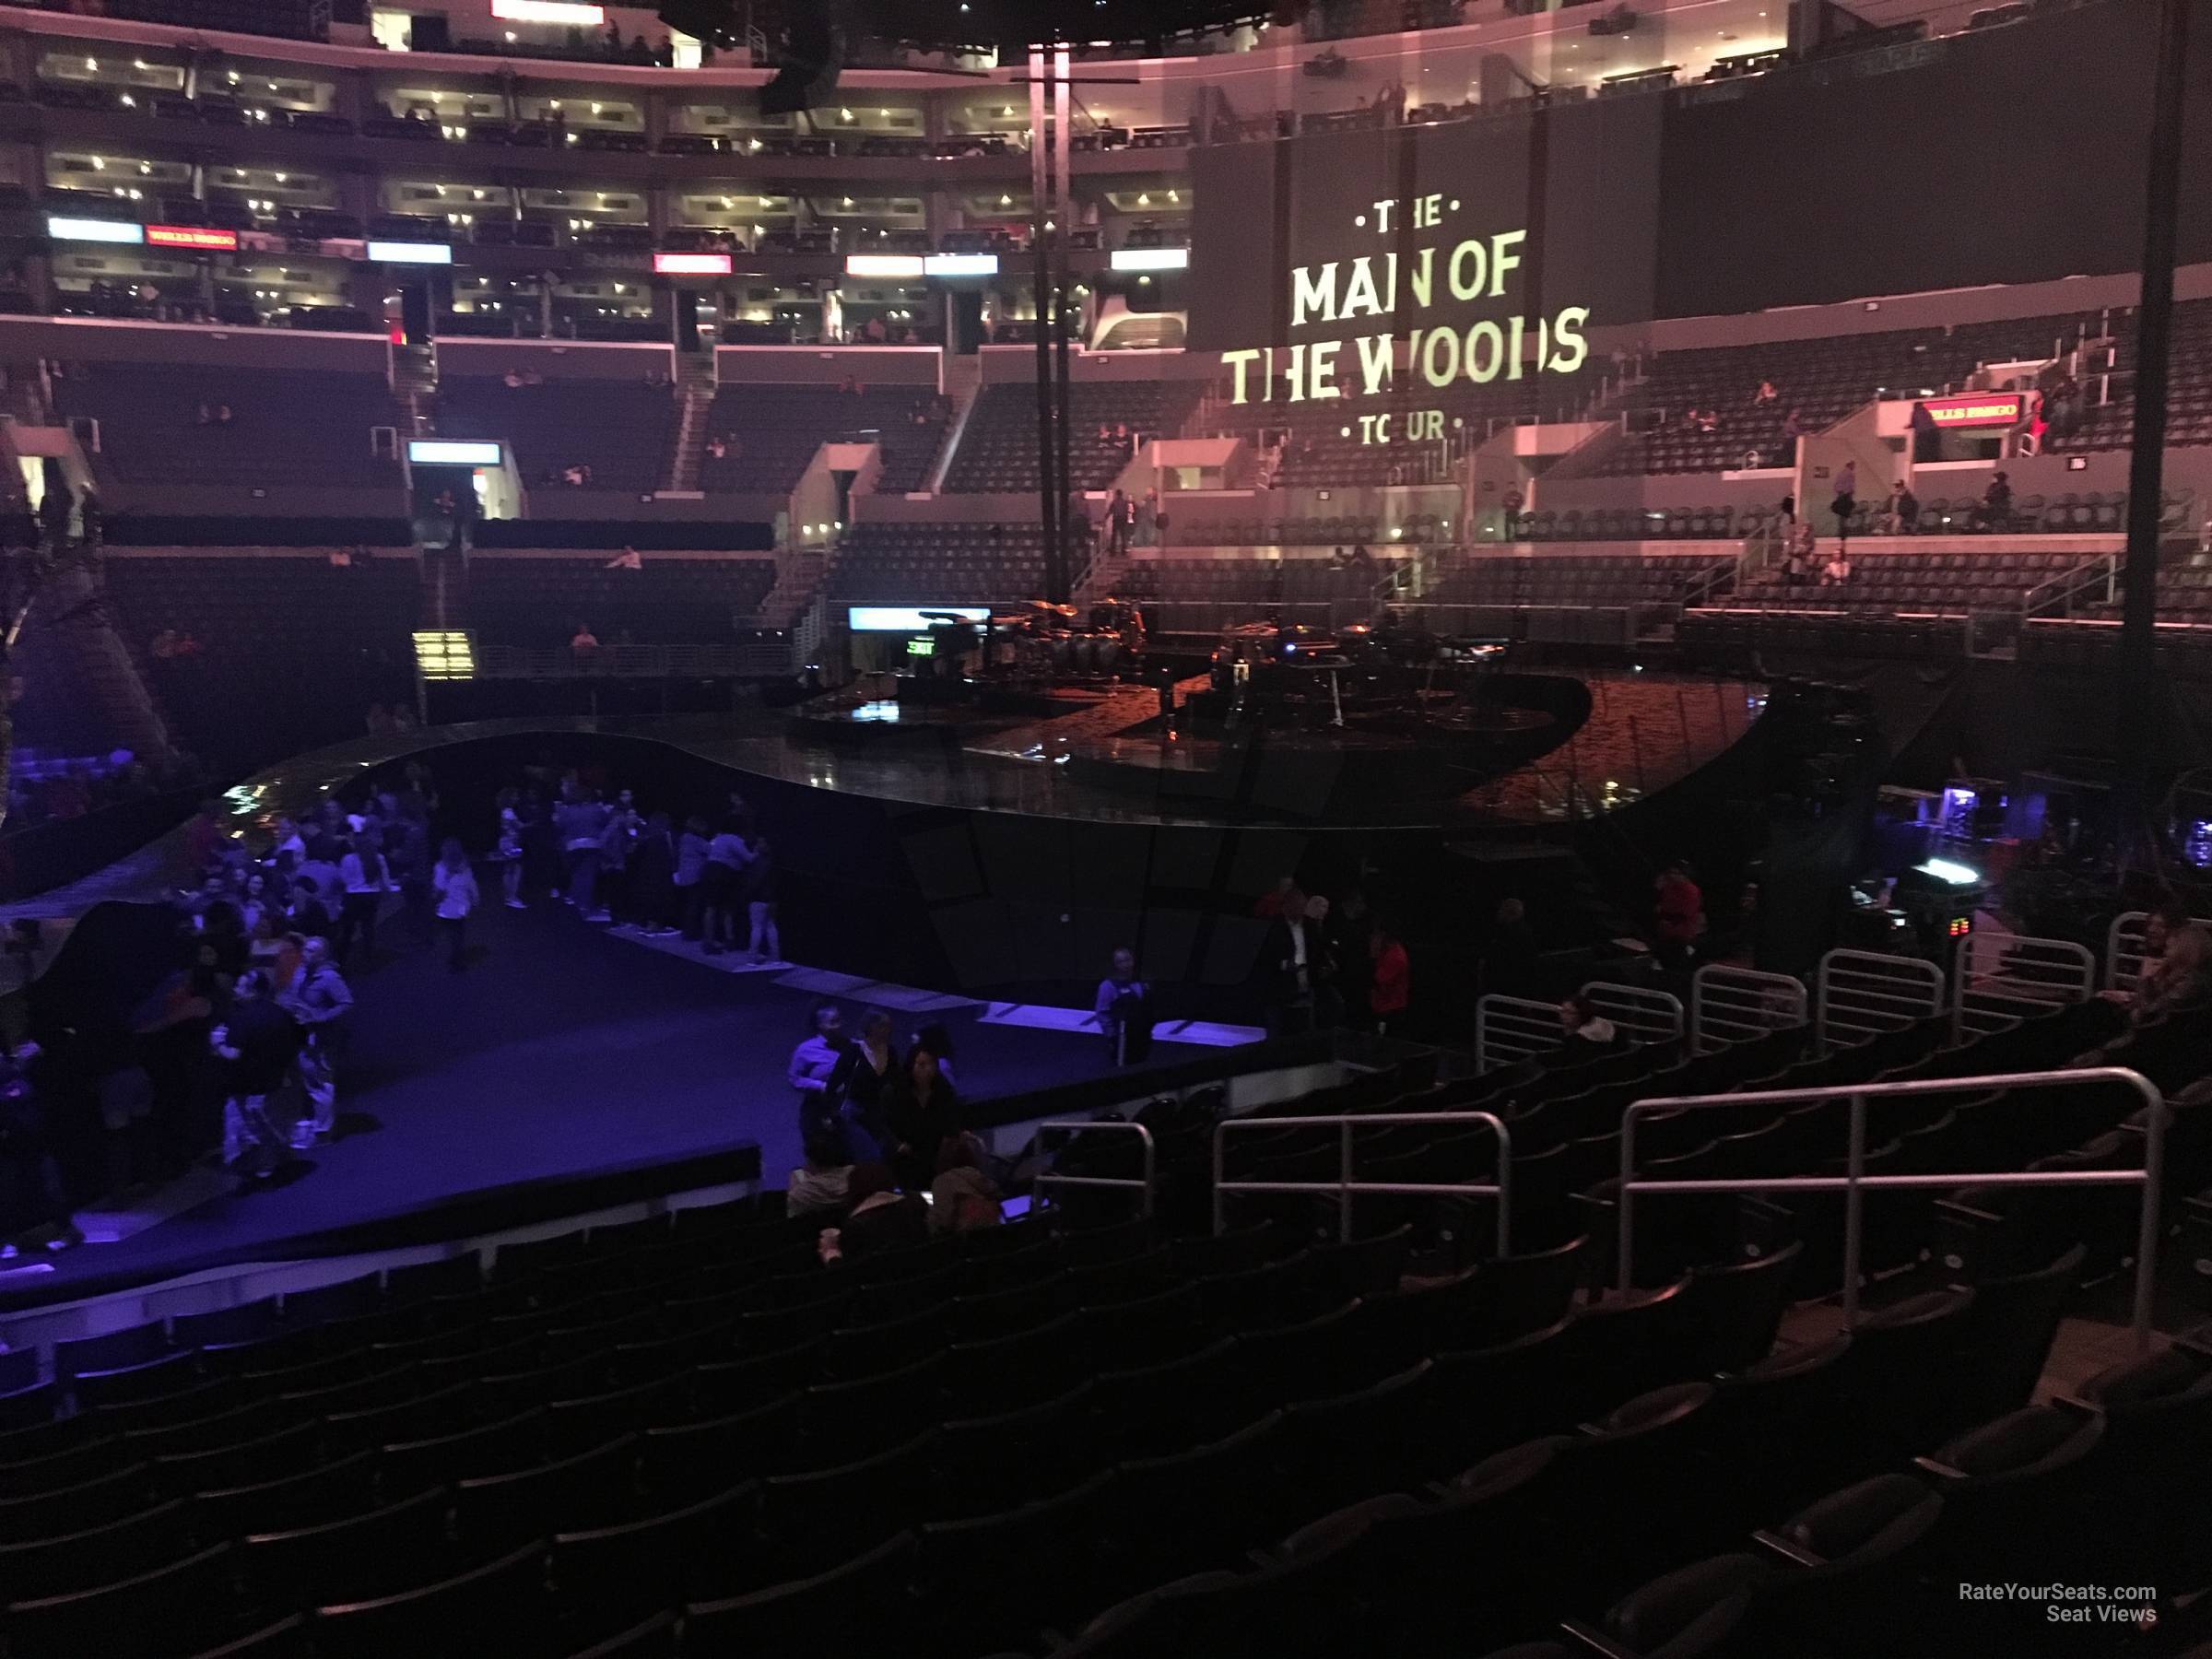 Staples Center Section 119 Concert Seating - RateYourSeats.com